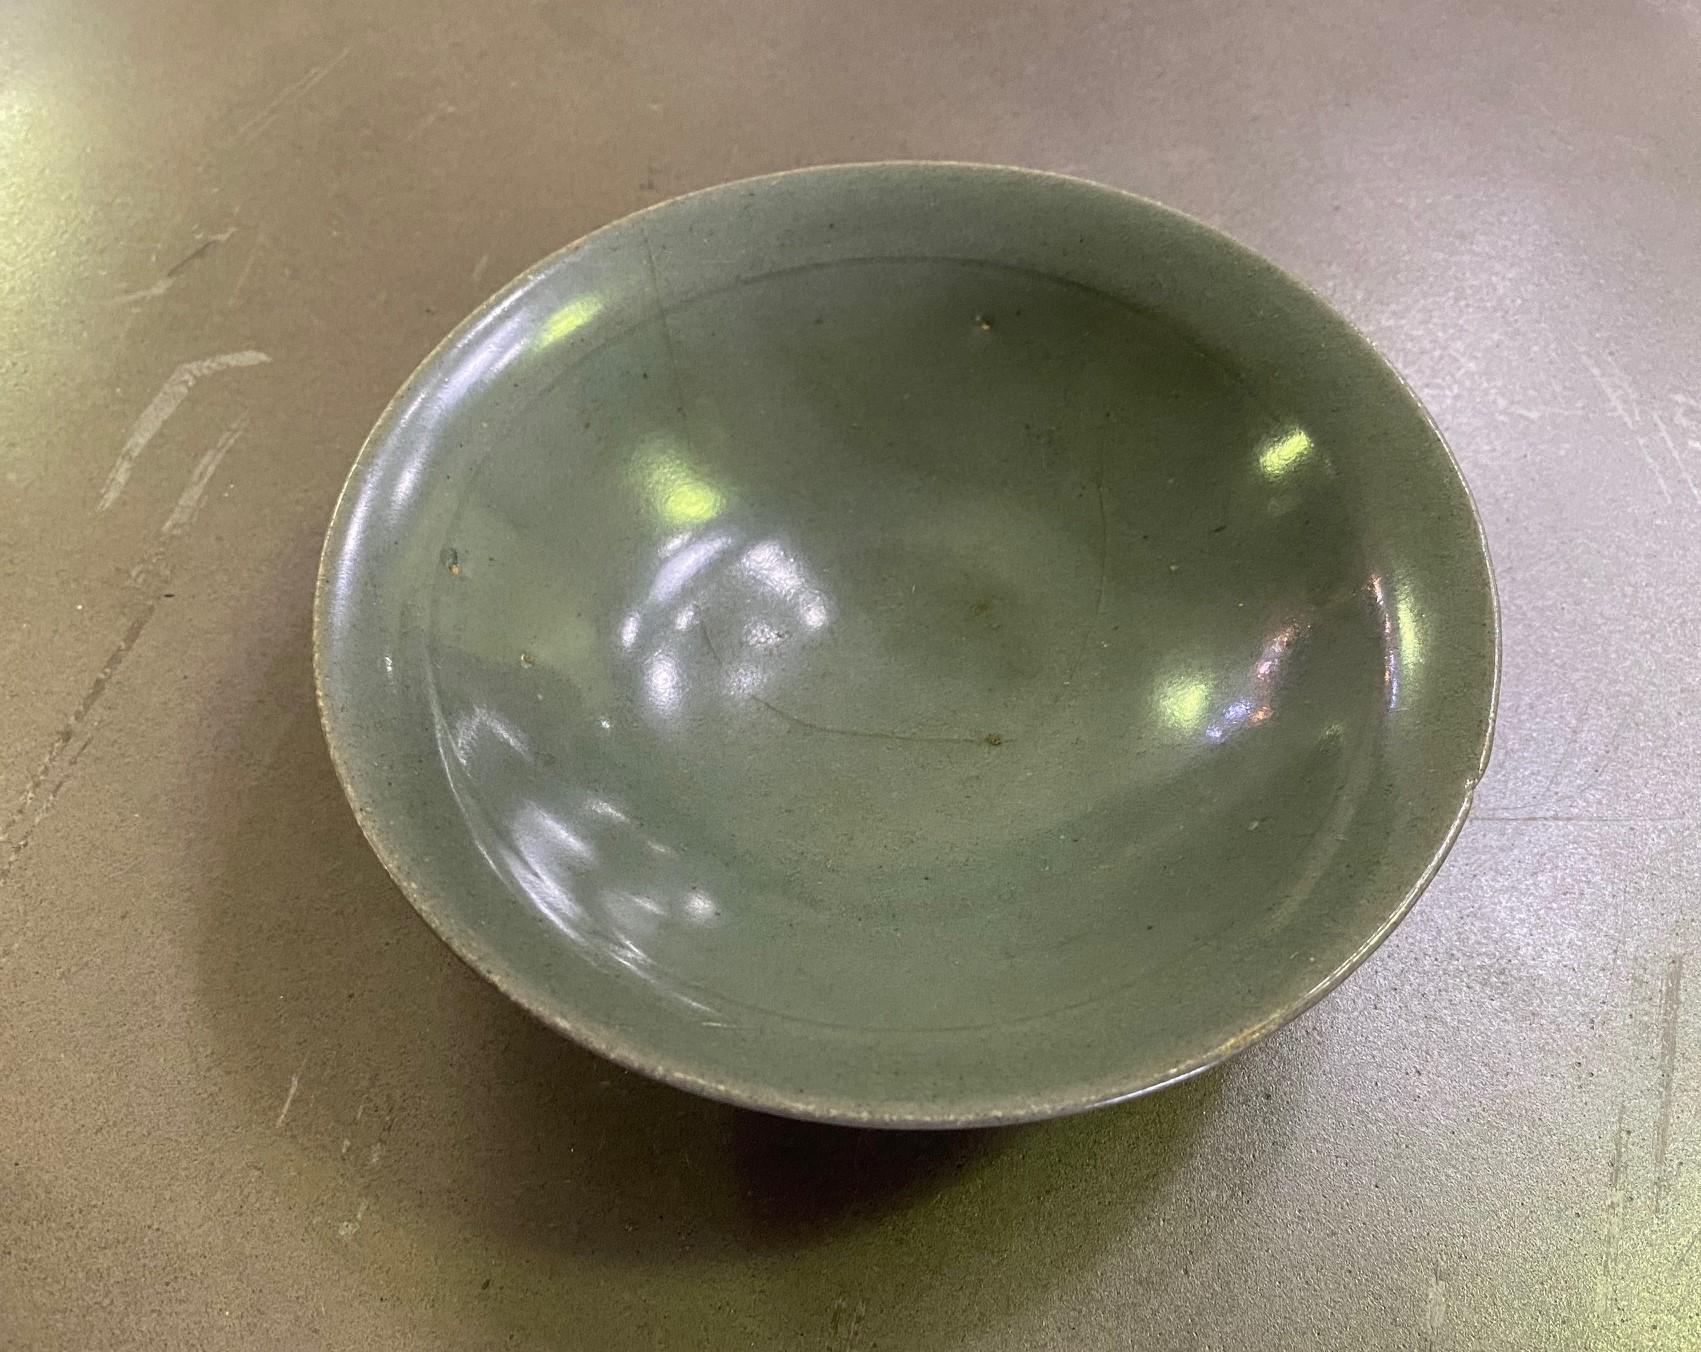 A wonderful Joseon Dynasty (1392-1897) Korean pottery bowl/ dish with a beautiful muted glaze, color, and nicely aged patina. 

As this is not our area of expertise, we are listing it simply as 19th century but it could very well be much older.